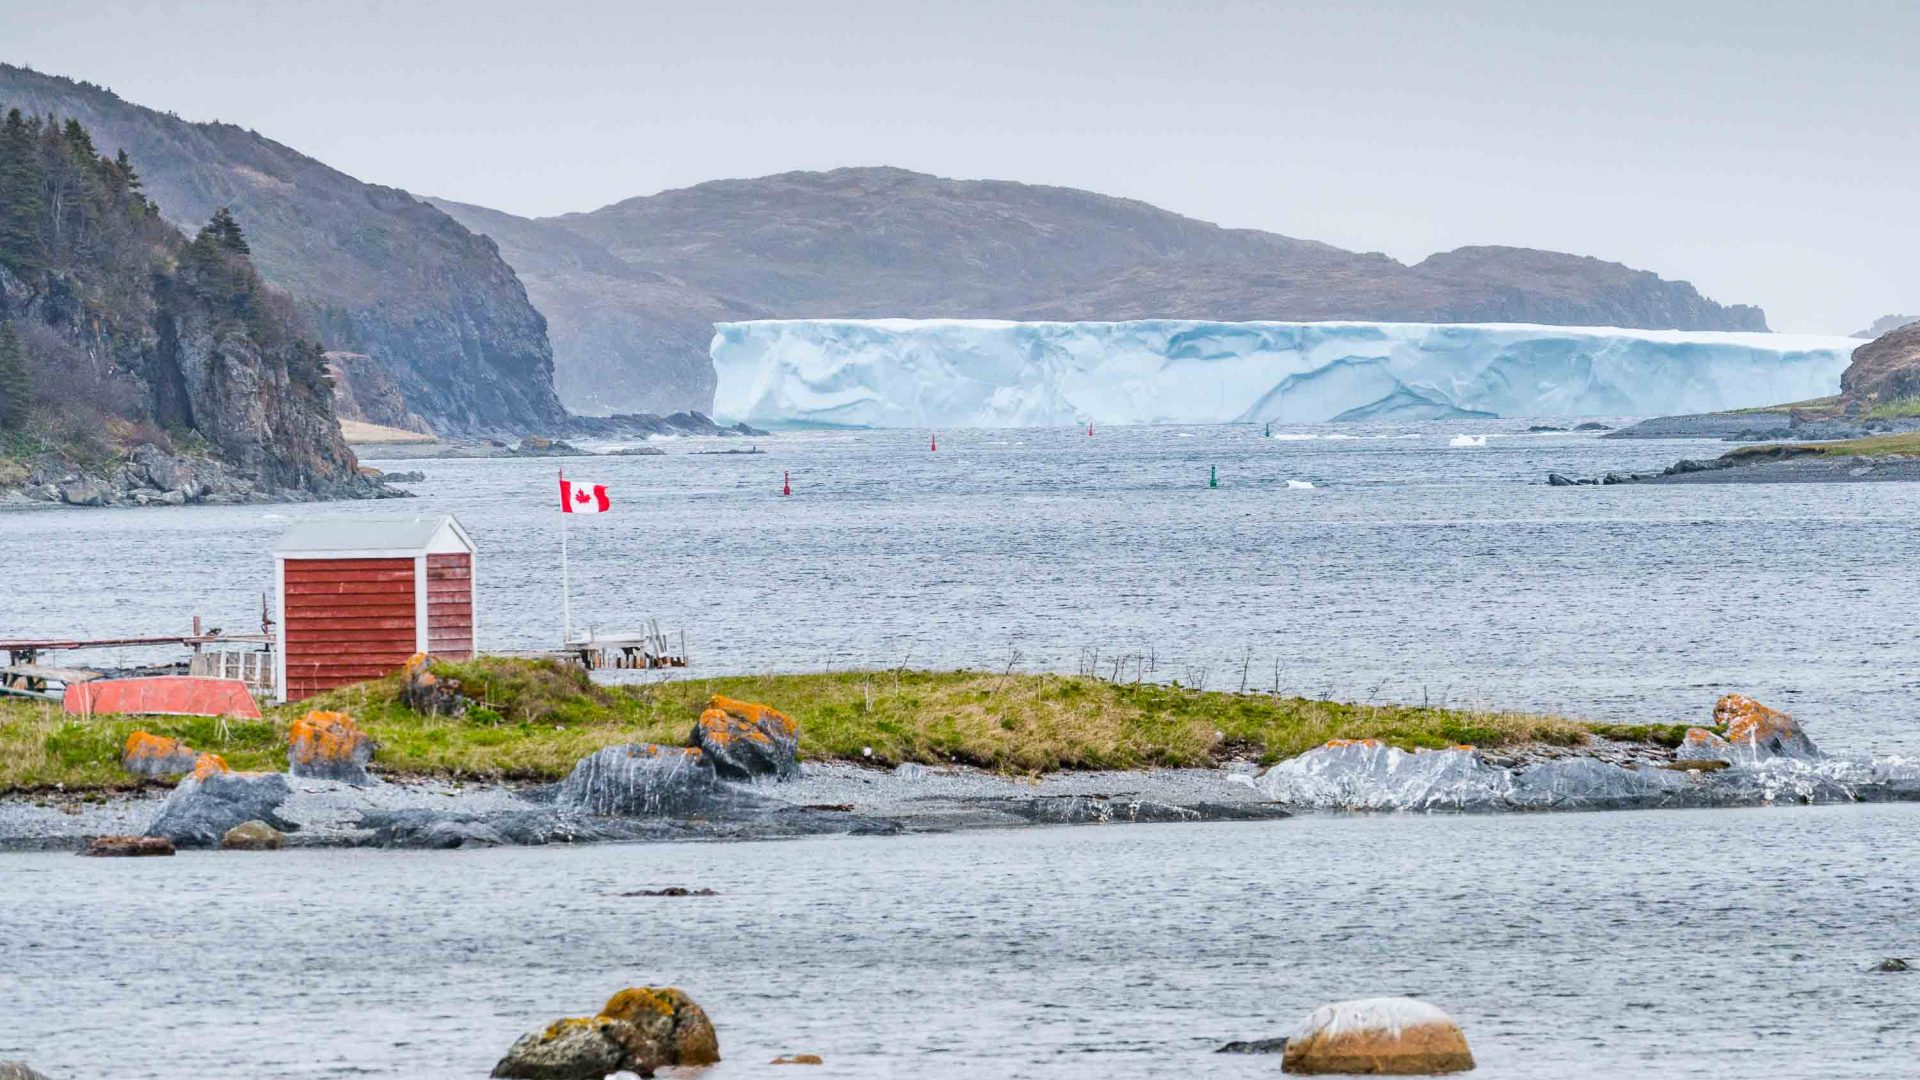 An iceberg is visble in the background while a red and white hut is in the foreground.